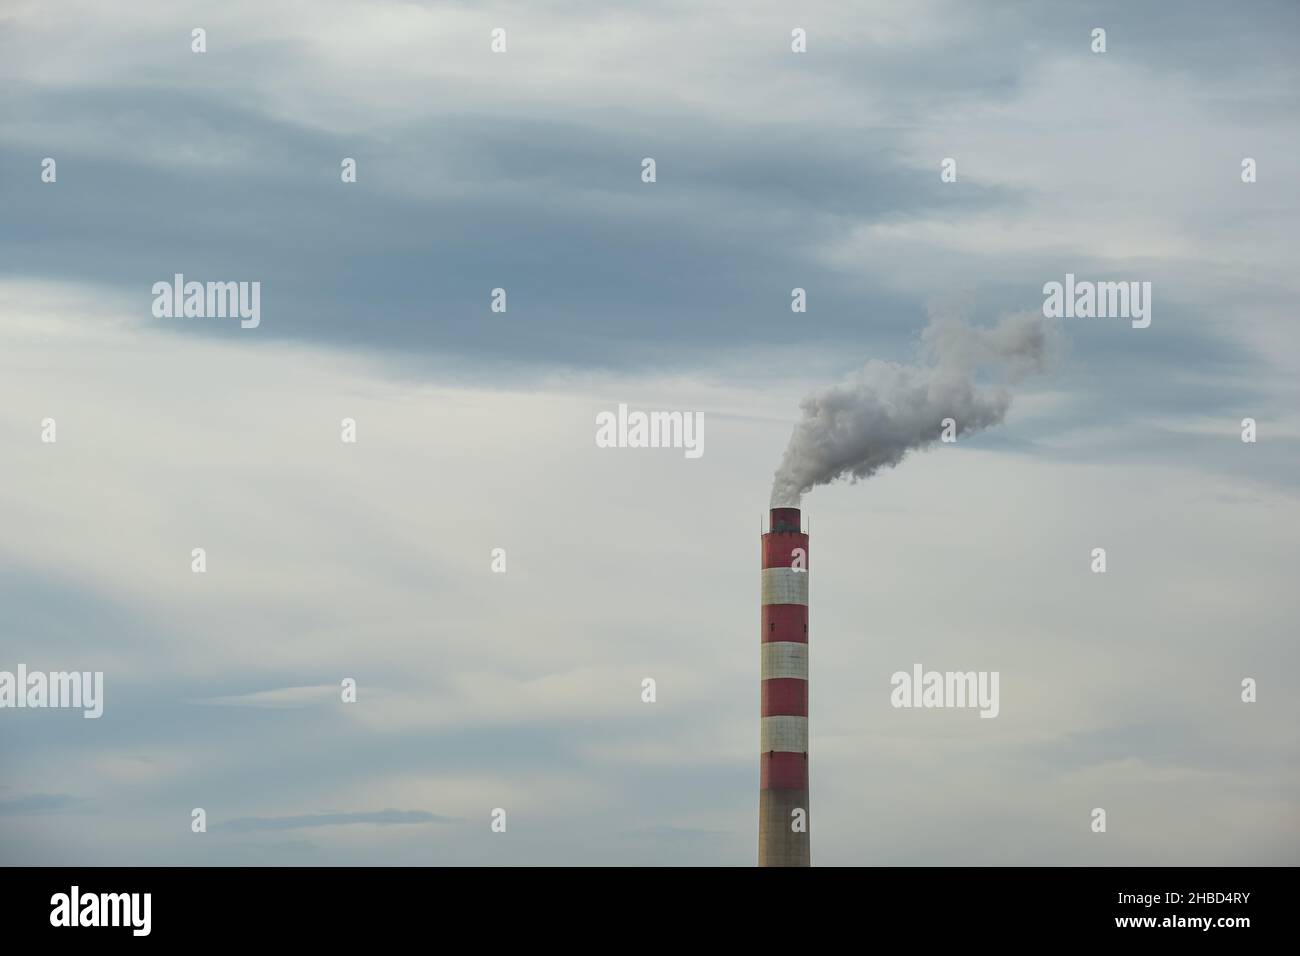 Factory chimney or tower with smoke coming out. Factory pipe pollutes the air in an industrial area. Global warming, polluted air. Stock Photo